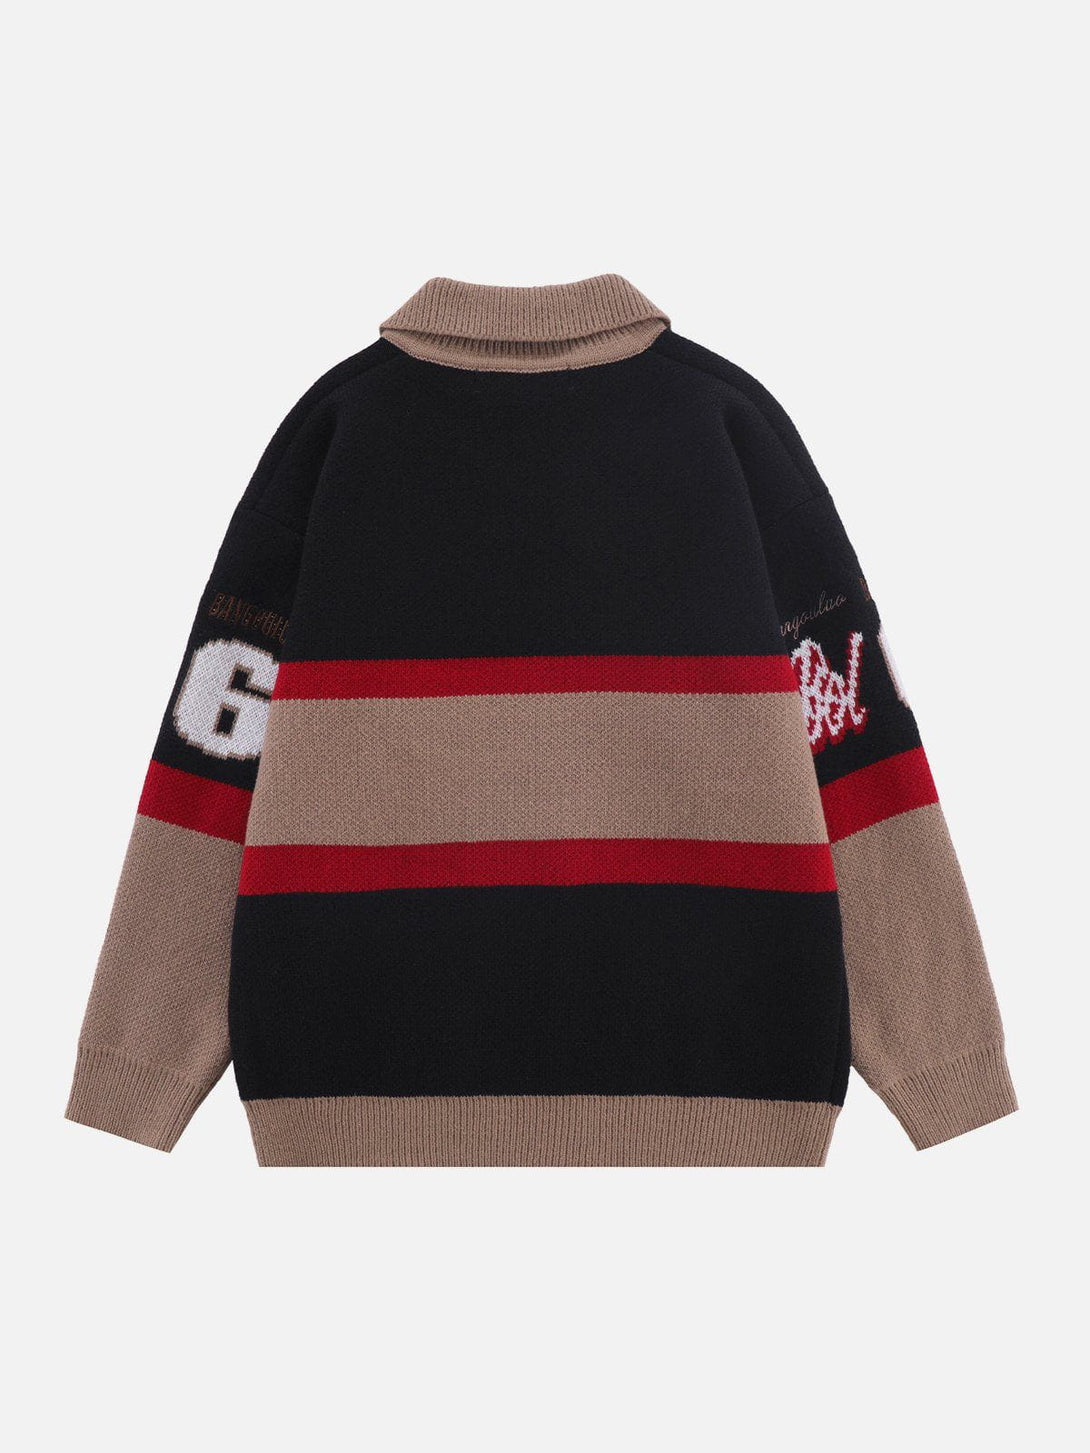 Ellesey - Colorblock Racing Polo Sweater-Streetwear Fashion - ellesey.com